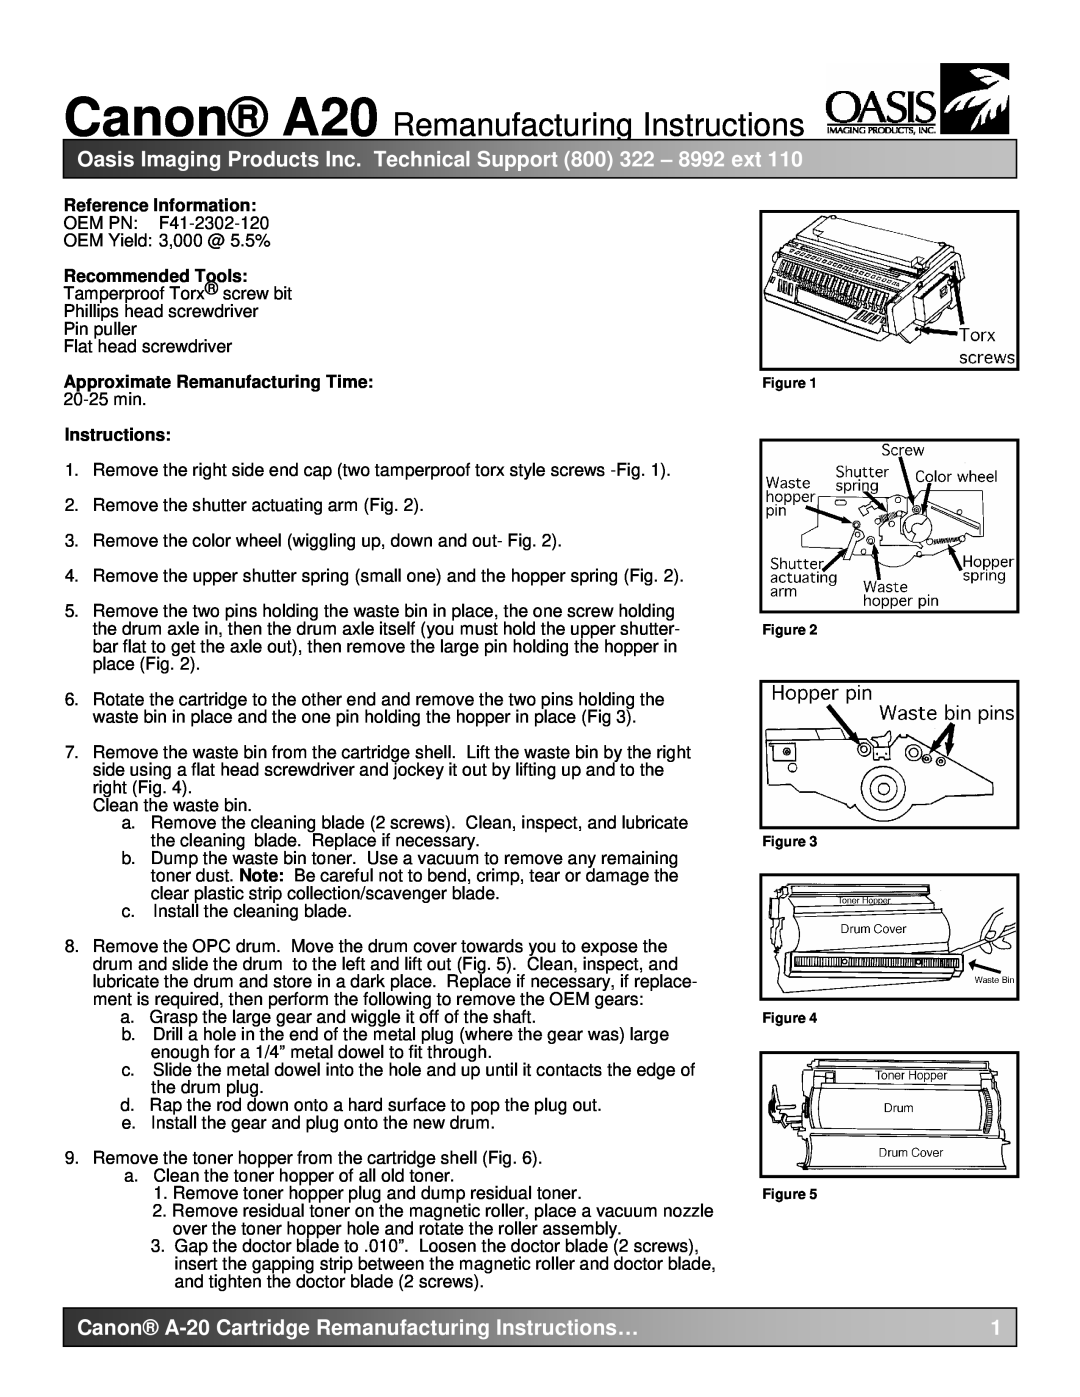 Canon manual Canon A20 Remanufacturing Instructions, Oasis Imaging Products Inc. Technical Support 800 322 - 8992 ext 